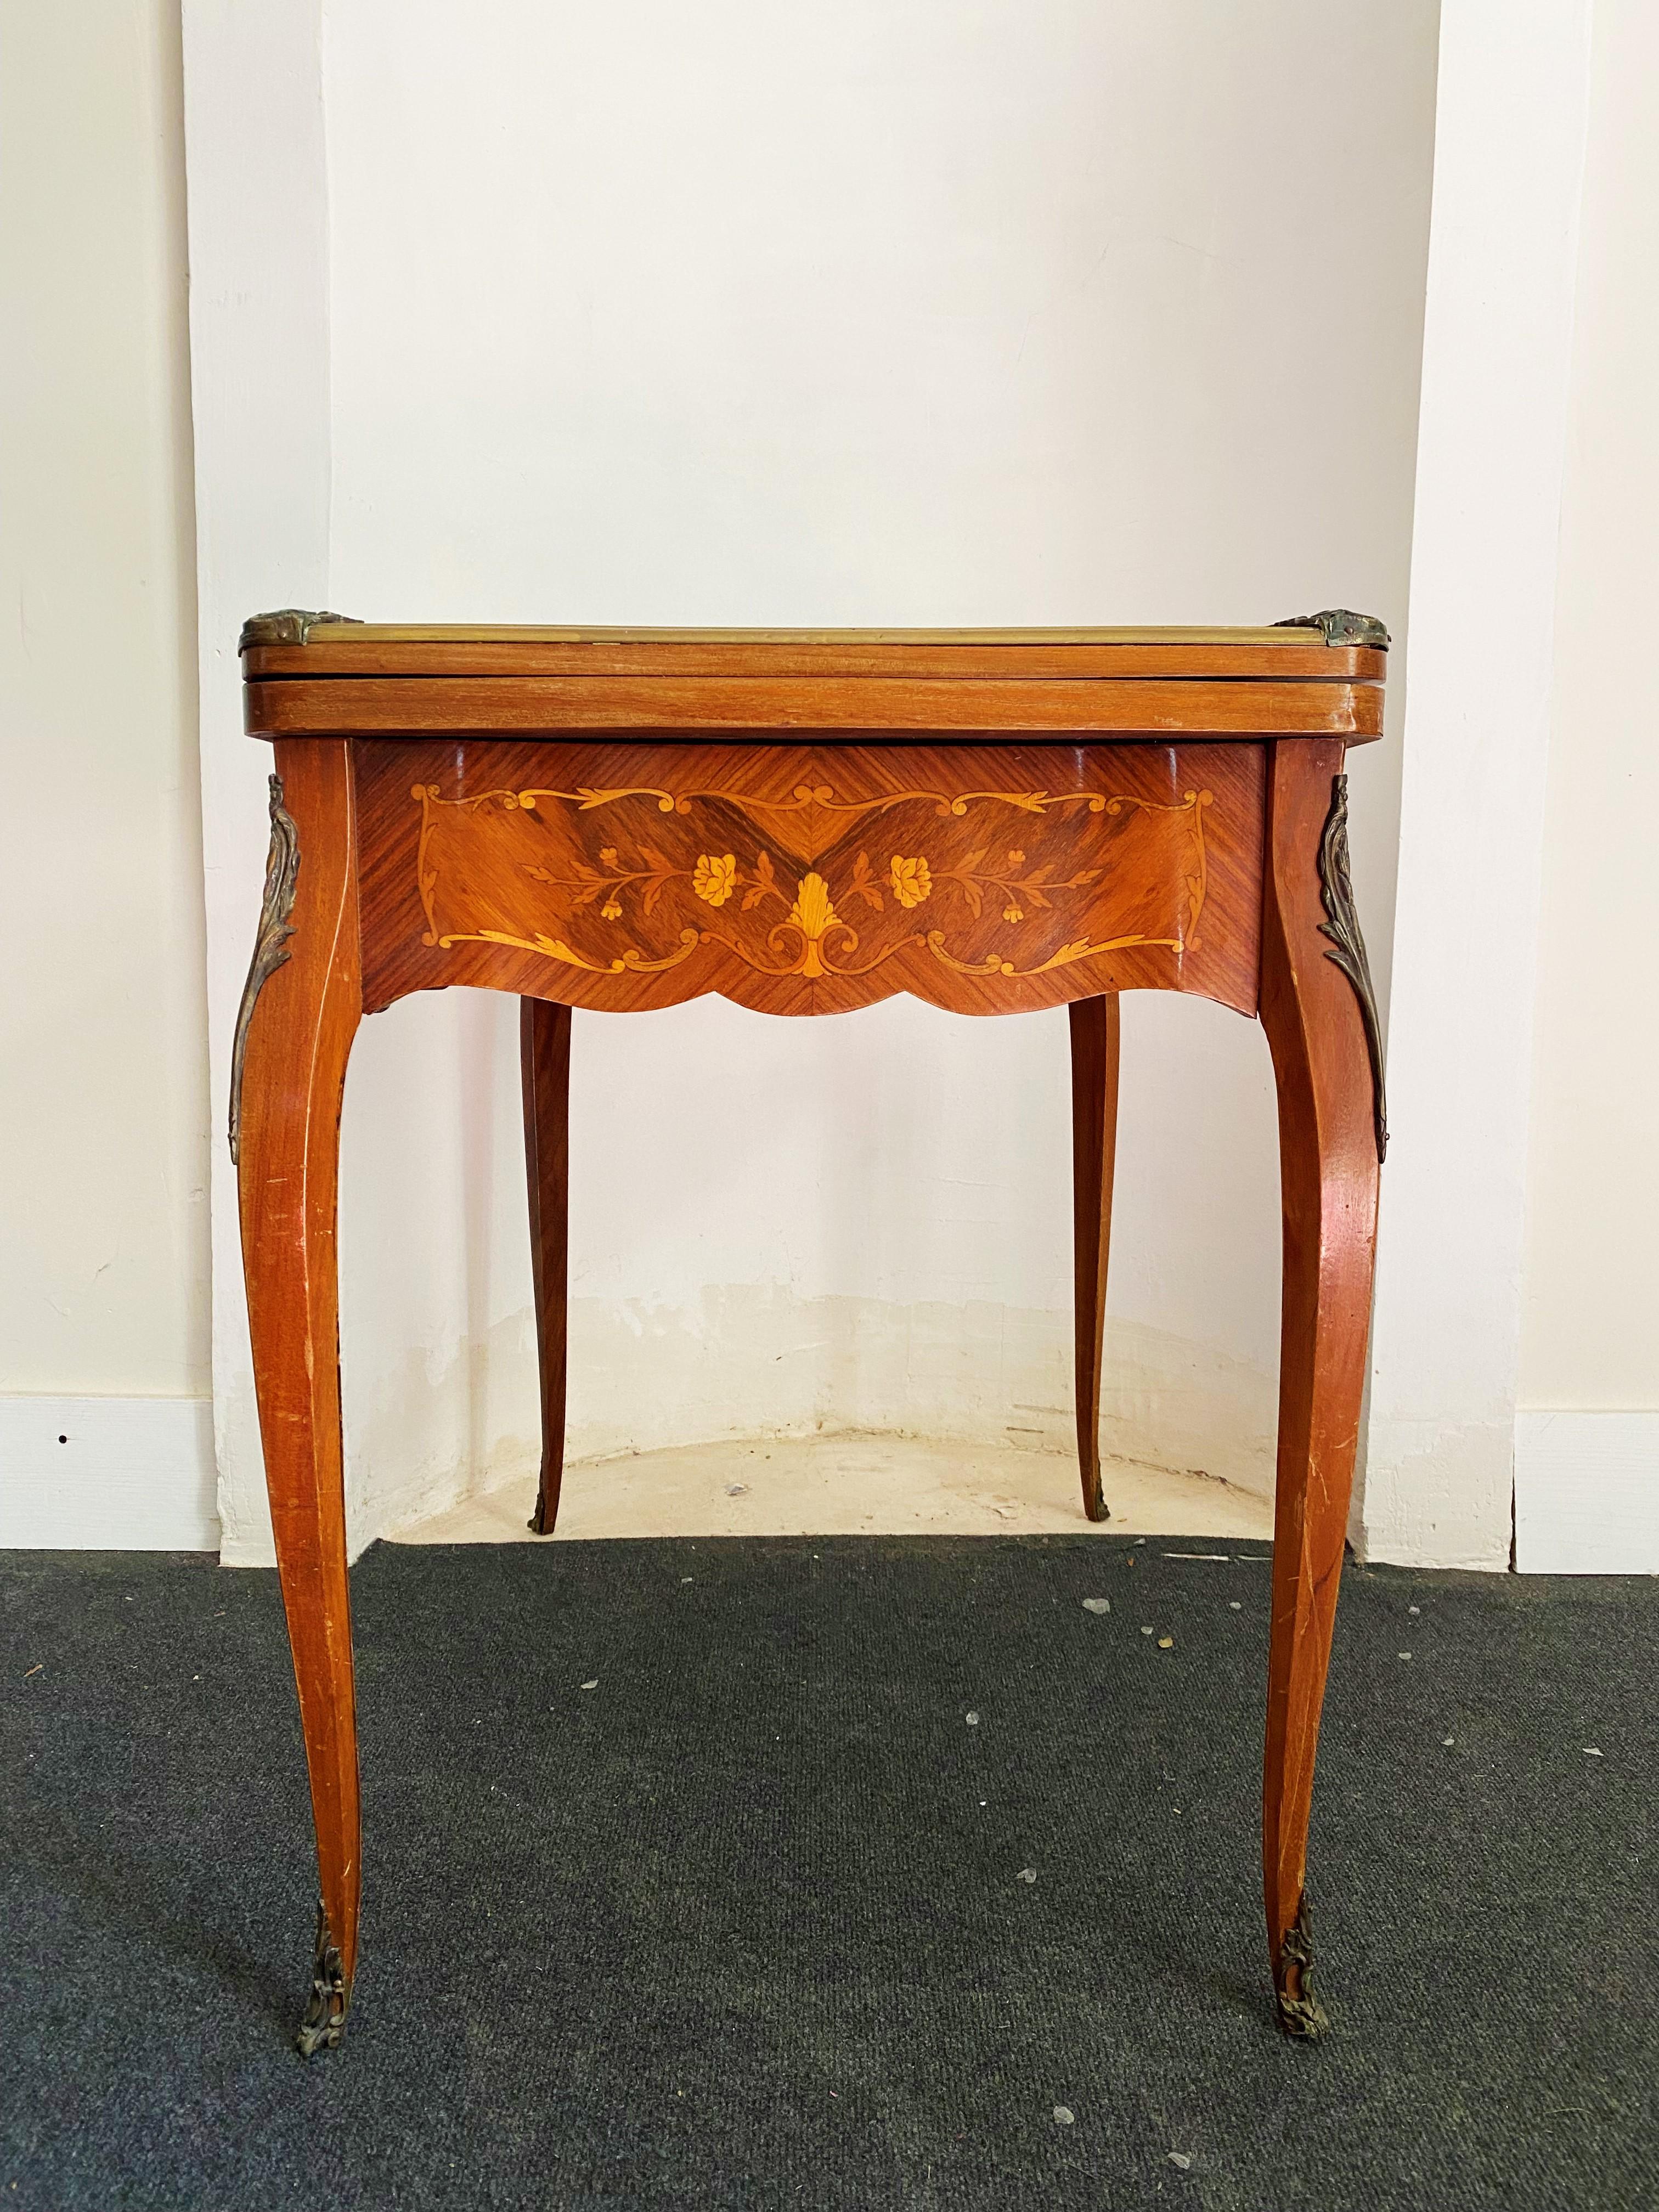 French Game Table Napoleon III Period - Louis XV Style - 19th Century - France For Sale 10